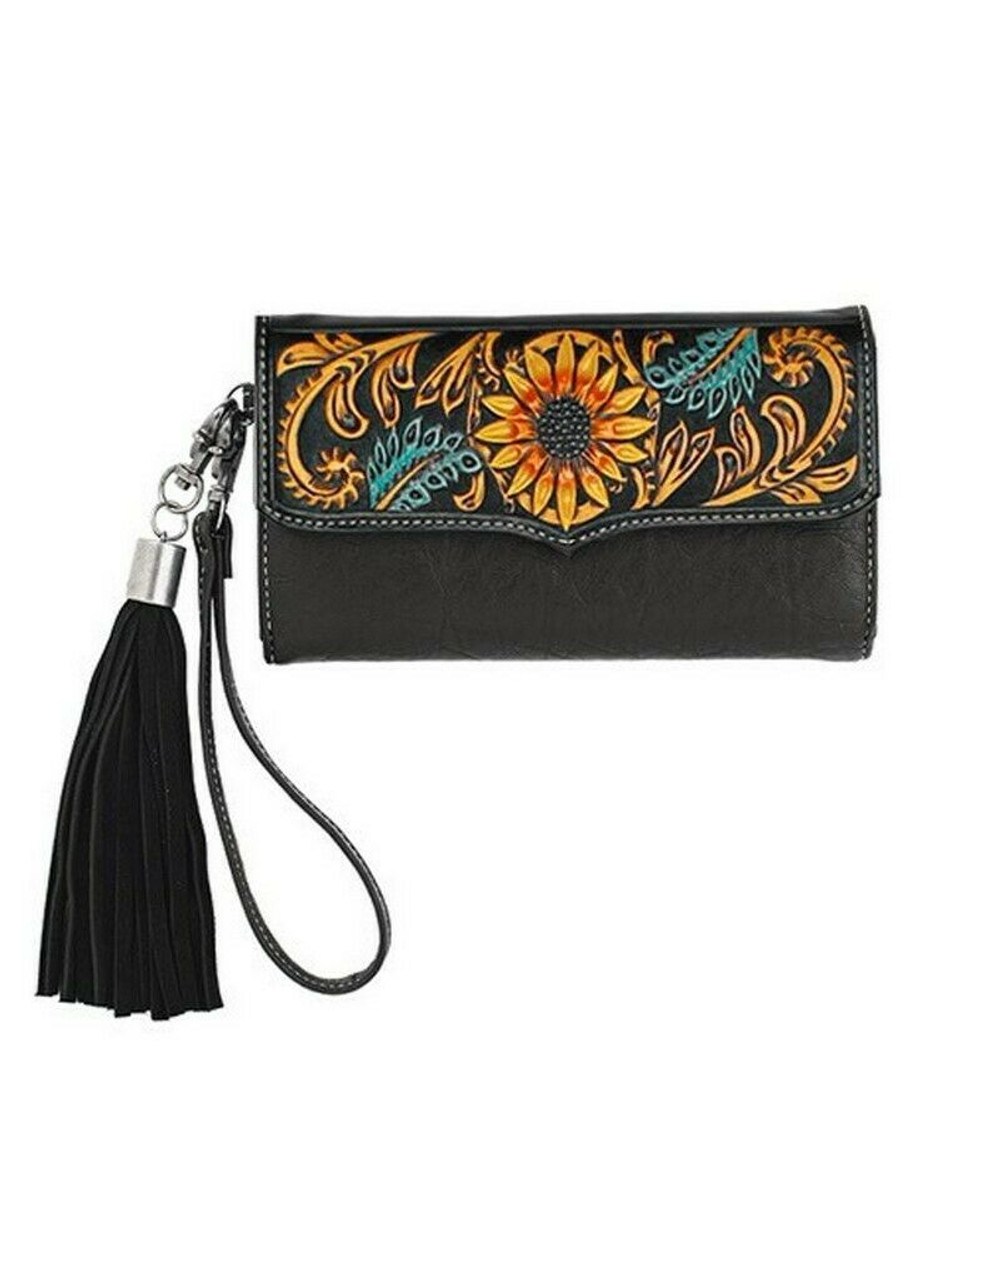 Handmade Leather wallets for women • western wallet woman • tooled